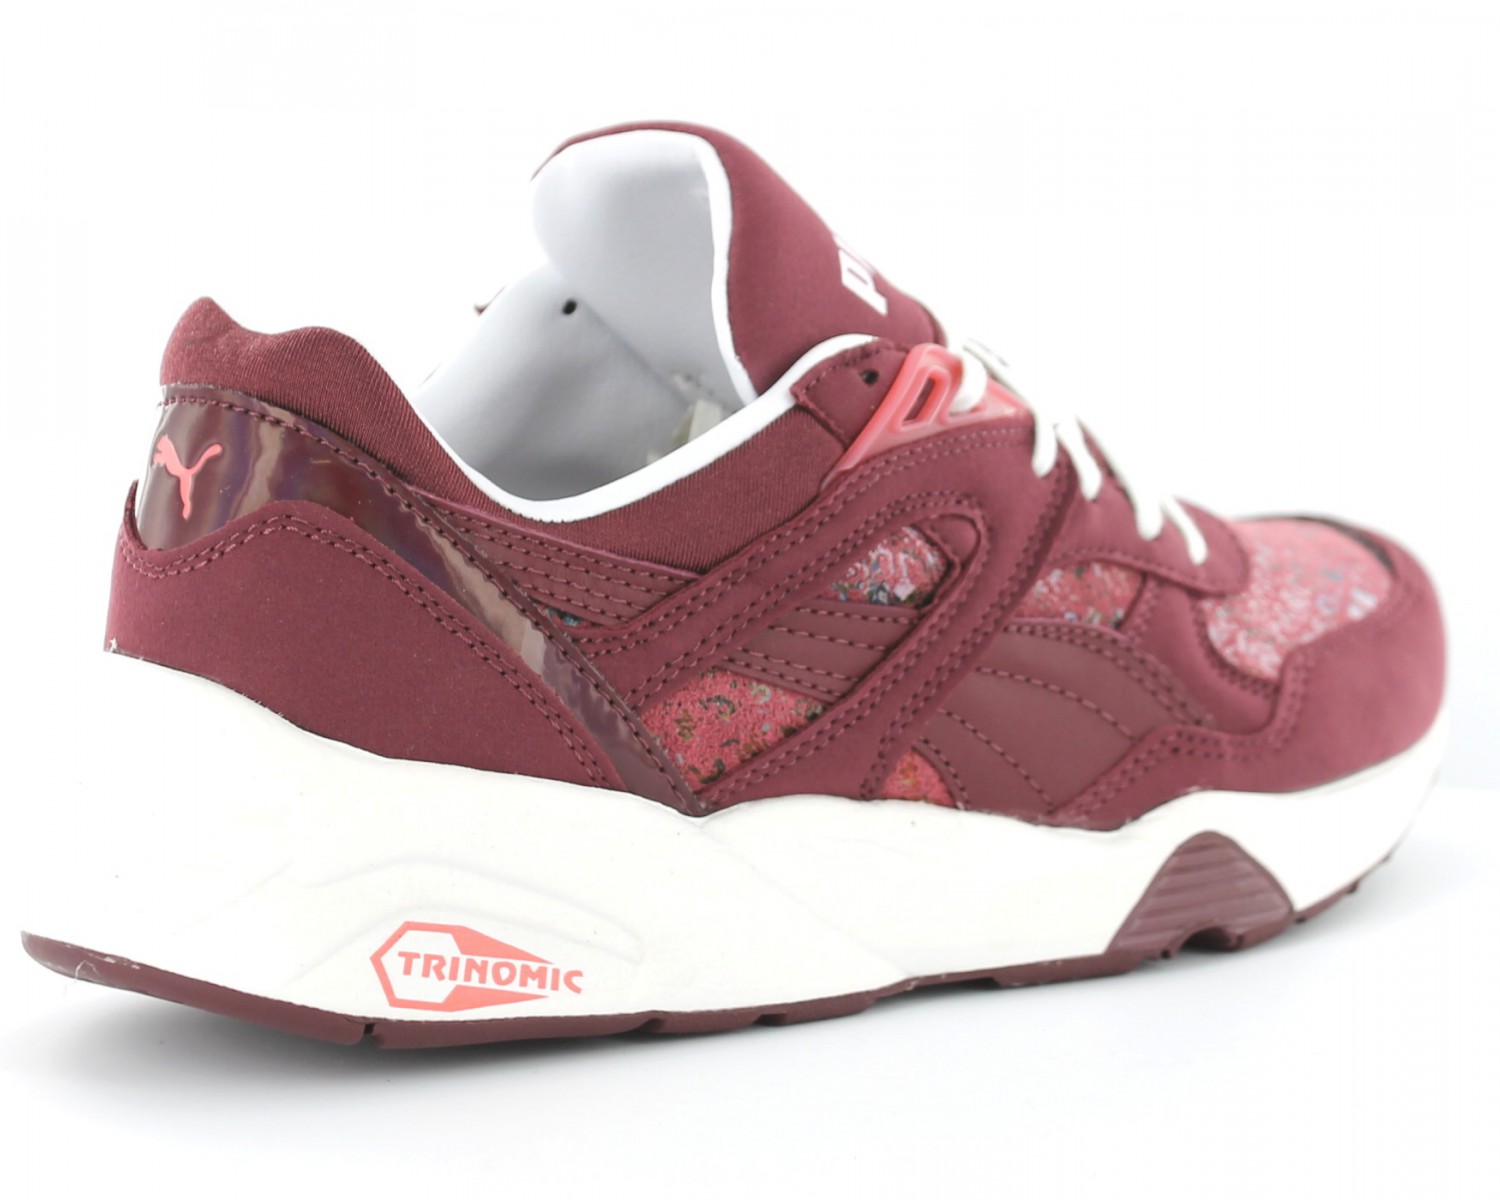 Purchase > puma trinomic femme bordeaux, Up to 66% OFF